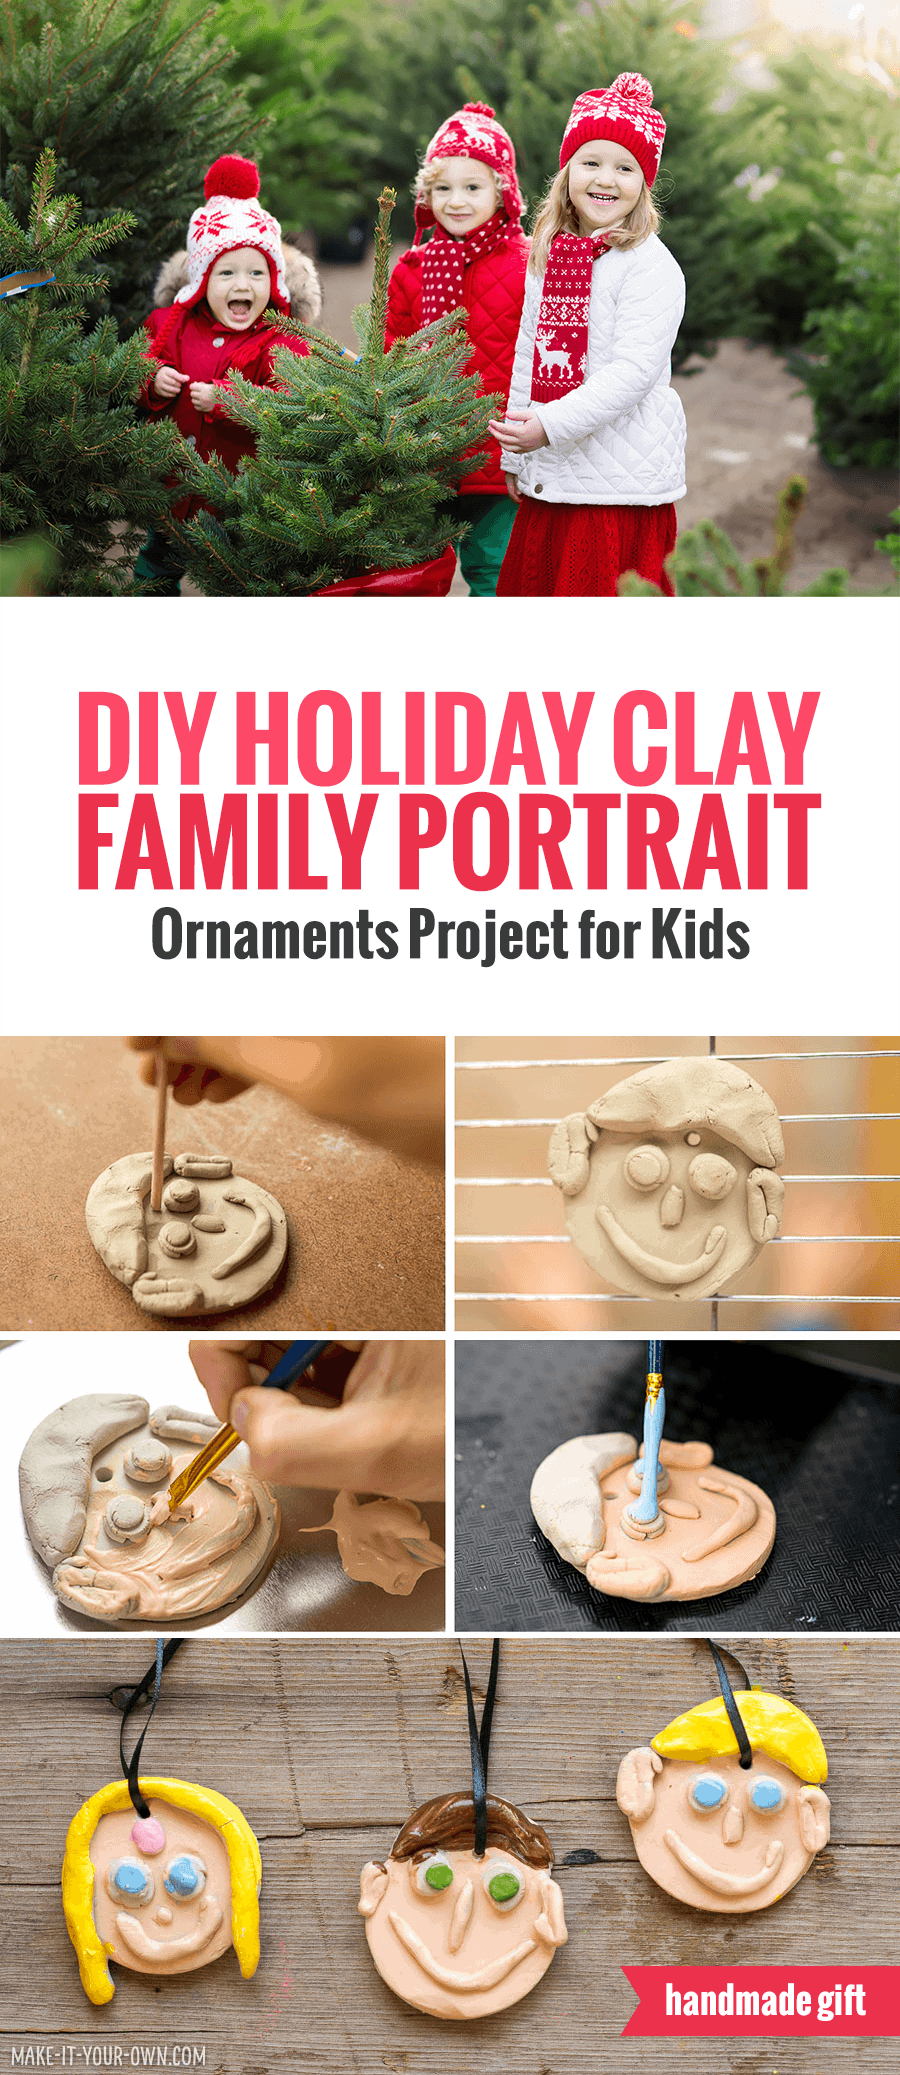 DIY Clay Family Portrait Ornaments - Holiday Project for Children *My kids would love this Christmas project